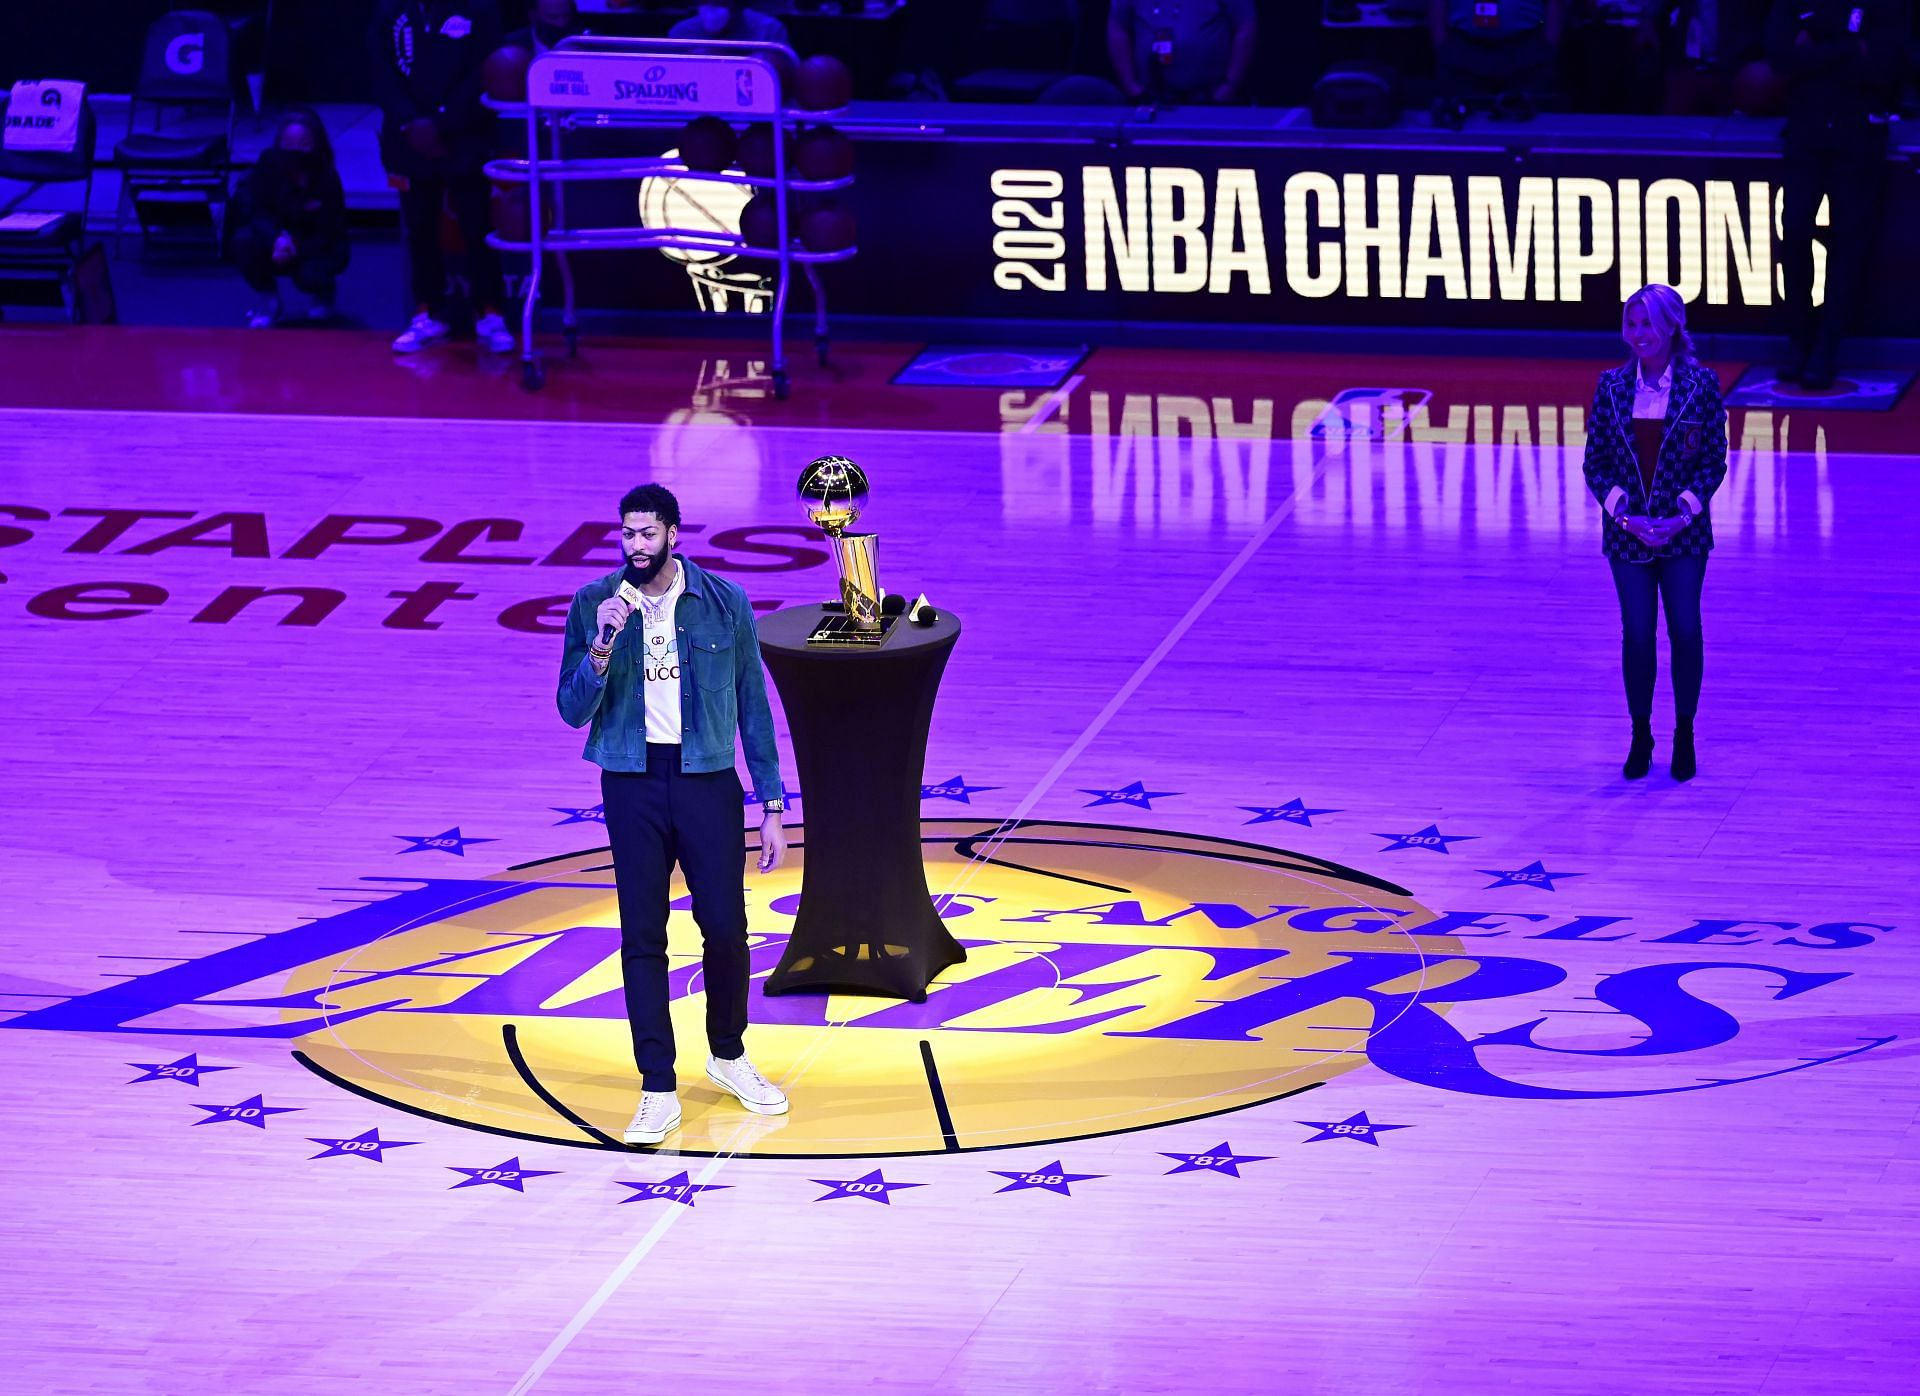 Anthony Davis #3 of the Los Angeles Lakers speaks during a banner unveiling ceremony for the Los Angeles Lakers 2020 NBA Championship